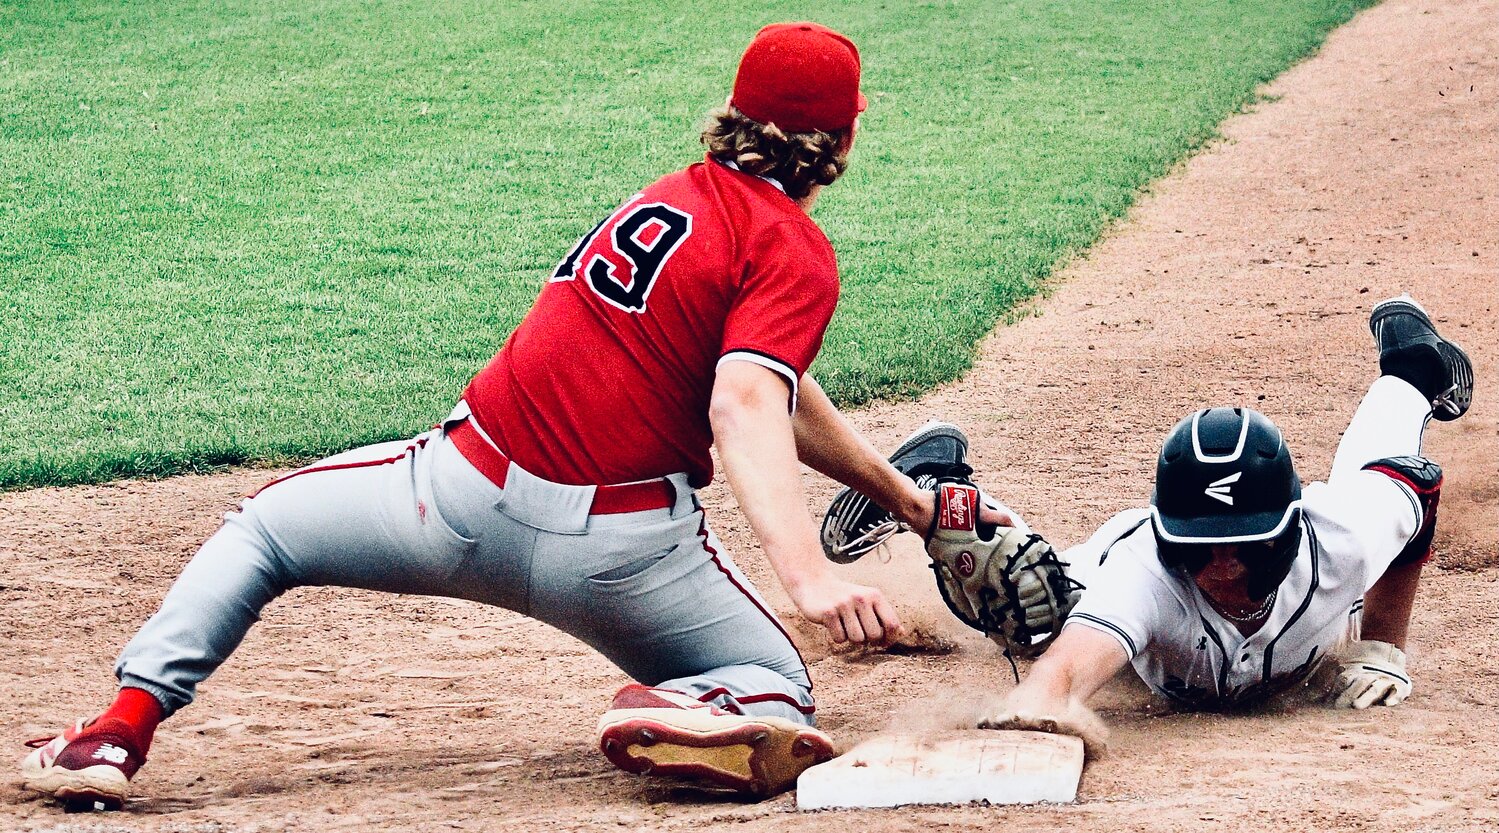 OZARK'S GEORGE REYNOLDS applies a tag during a pickoff attempt.